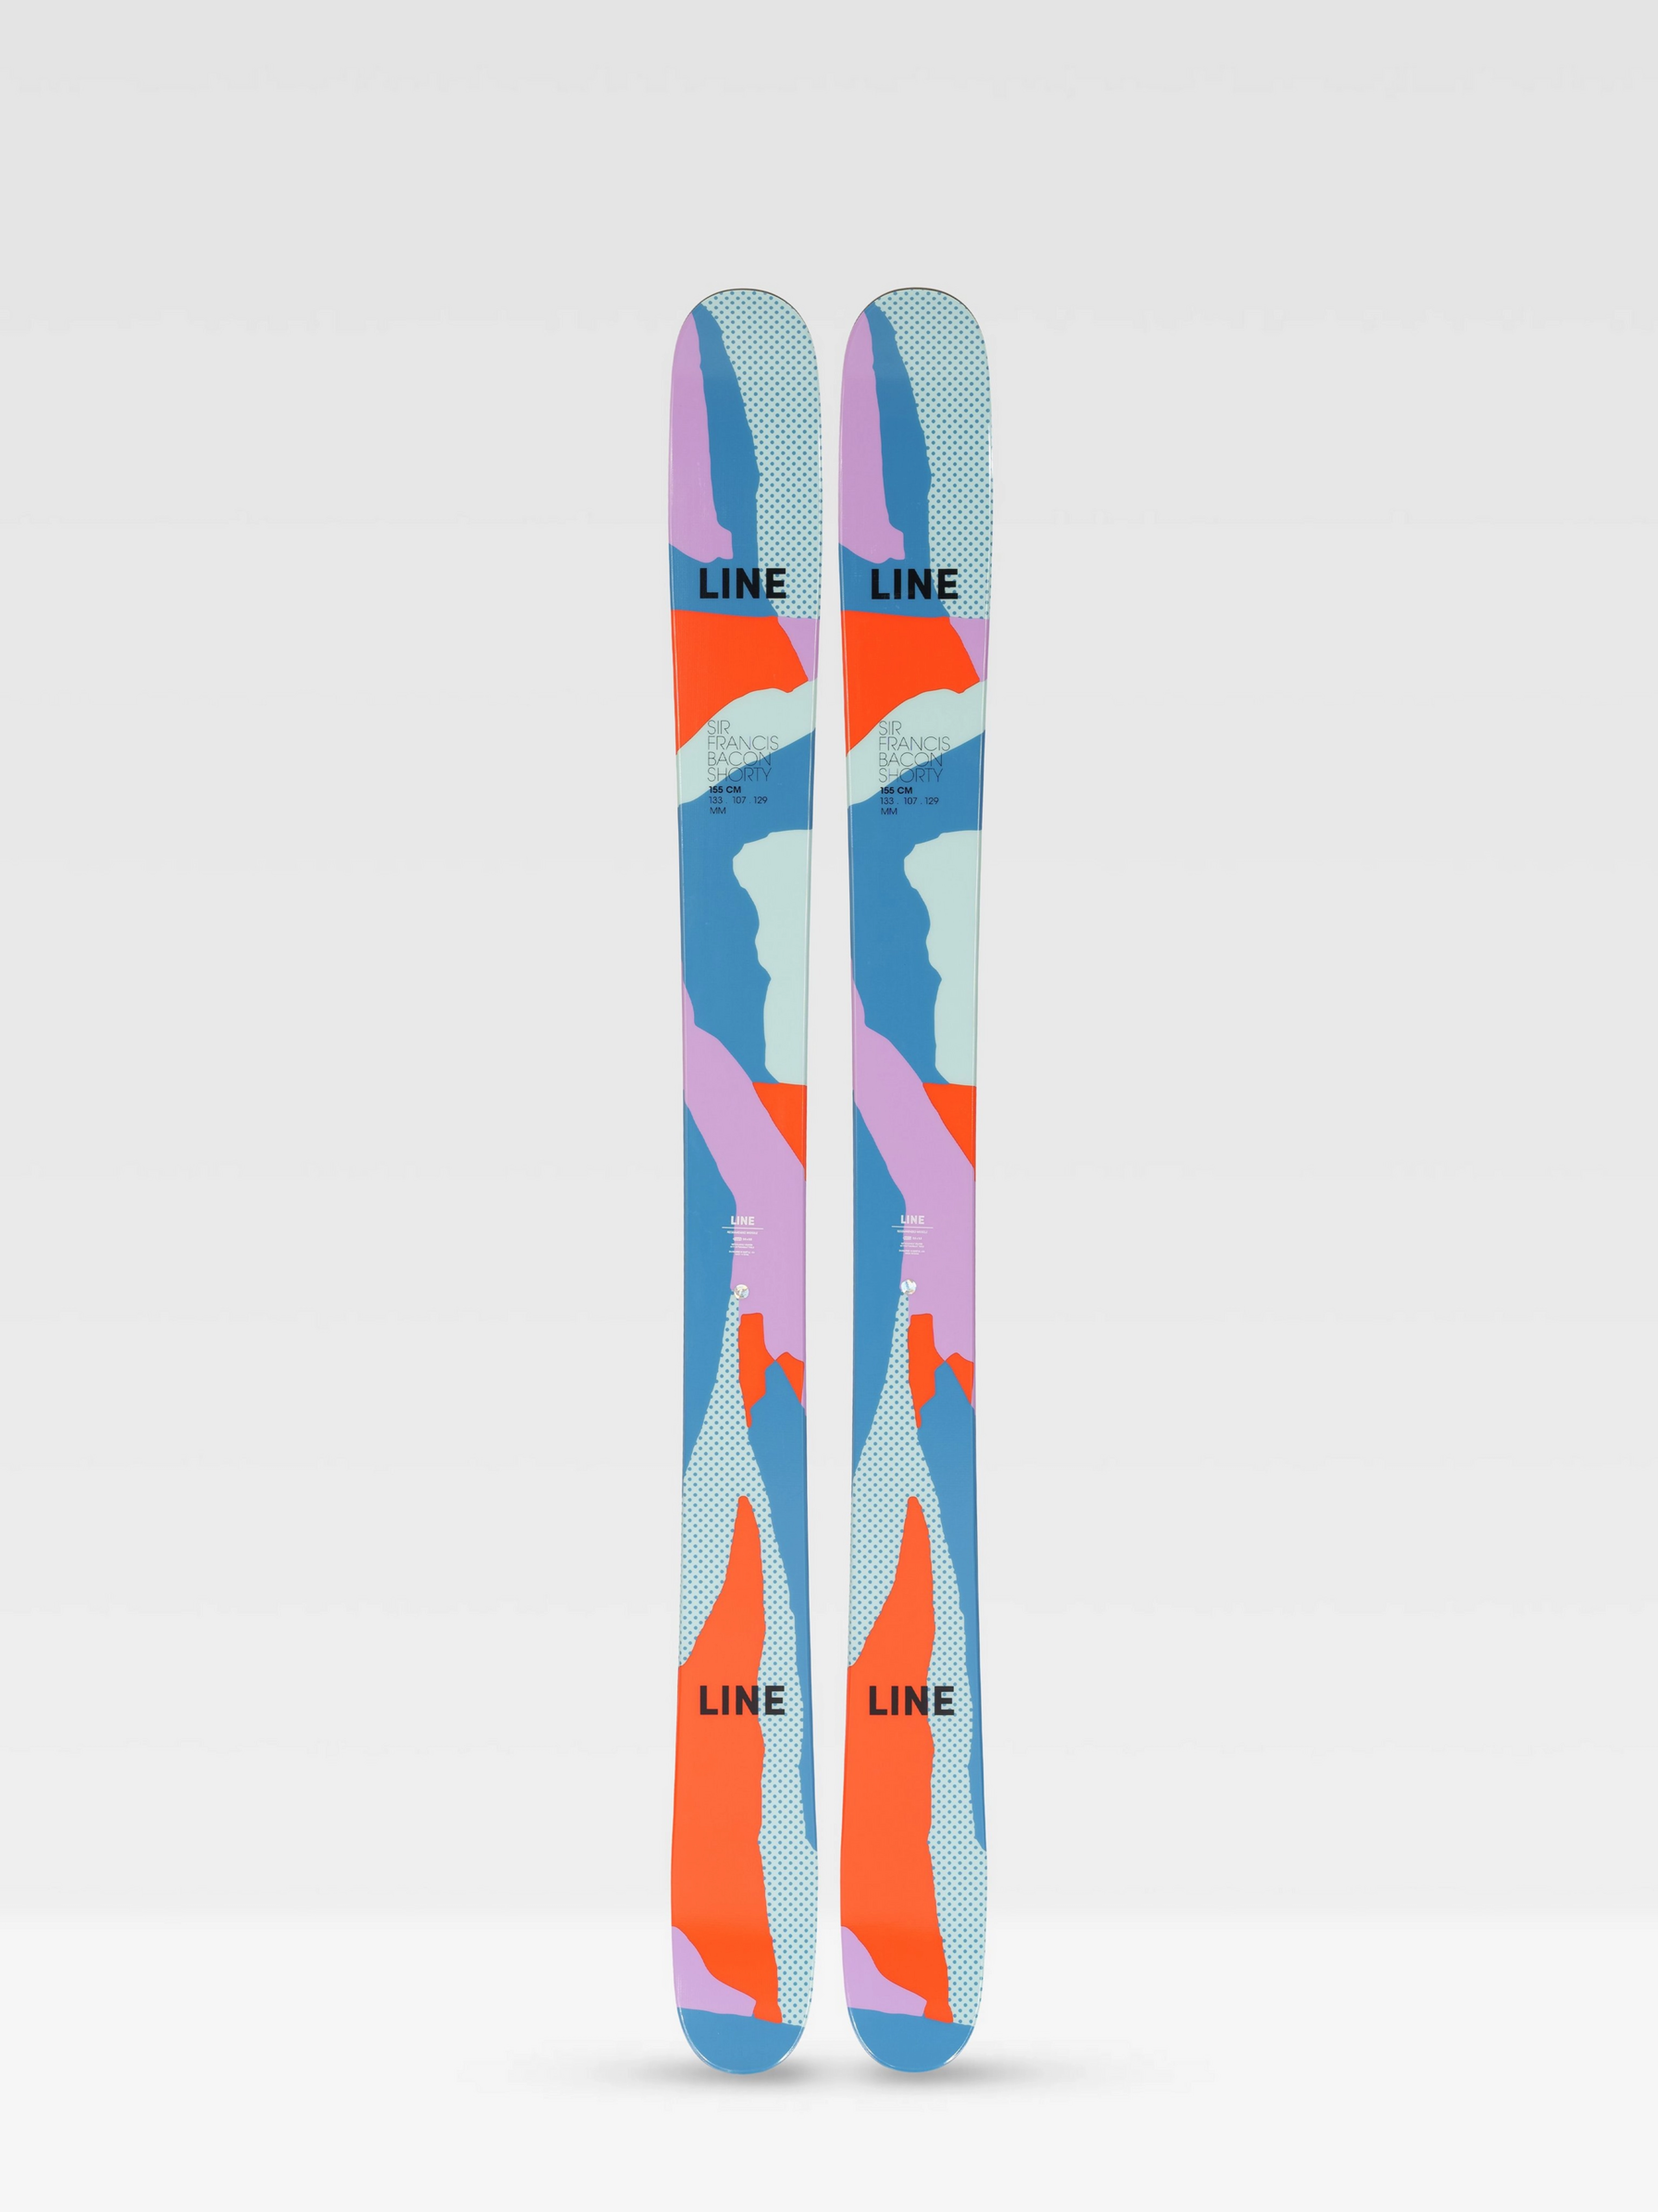 LINE - SIR FRANCIS BACON SHORTY SKIS, 165 cm only - 2023